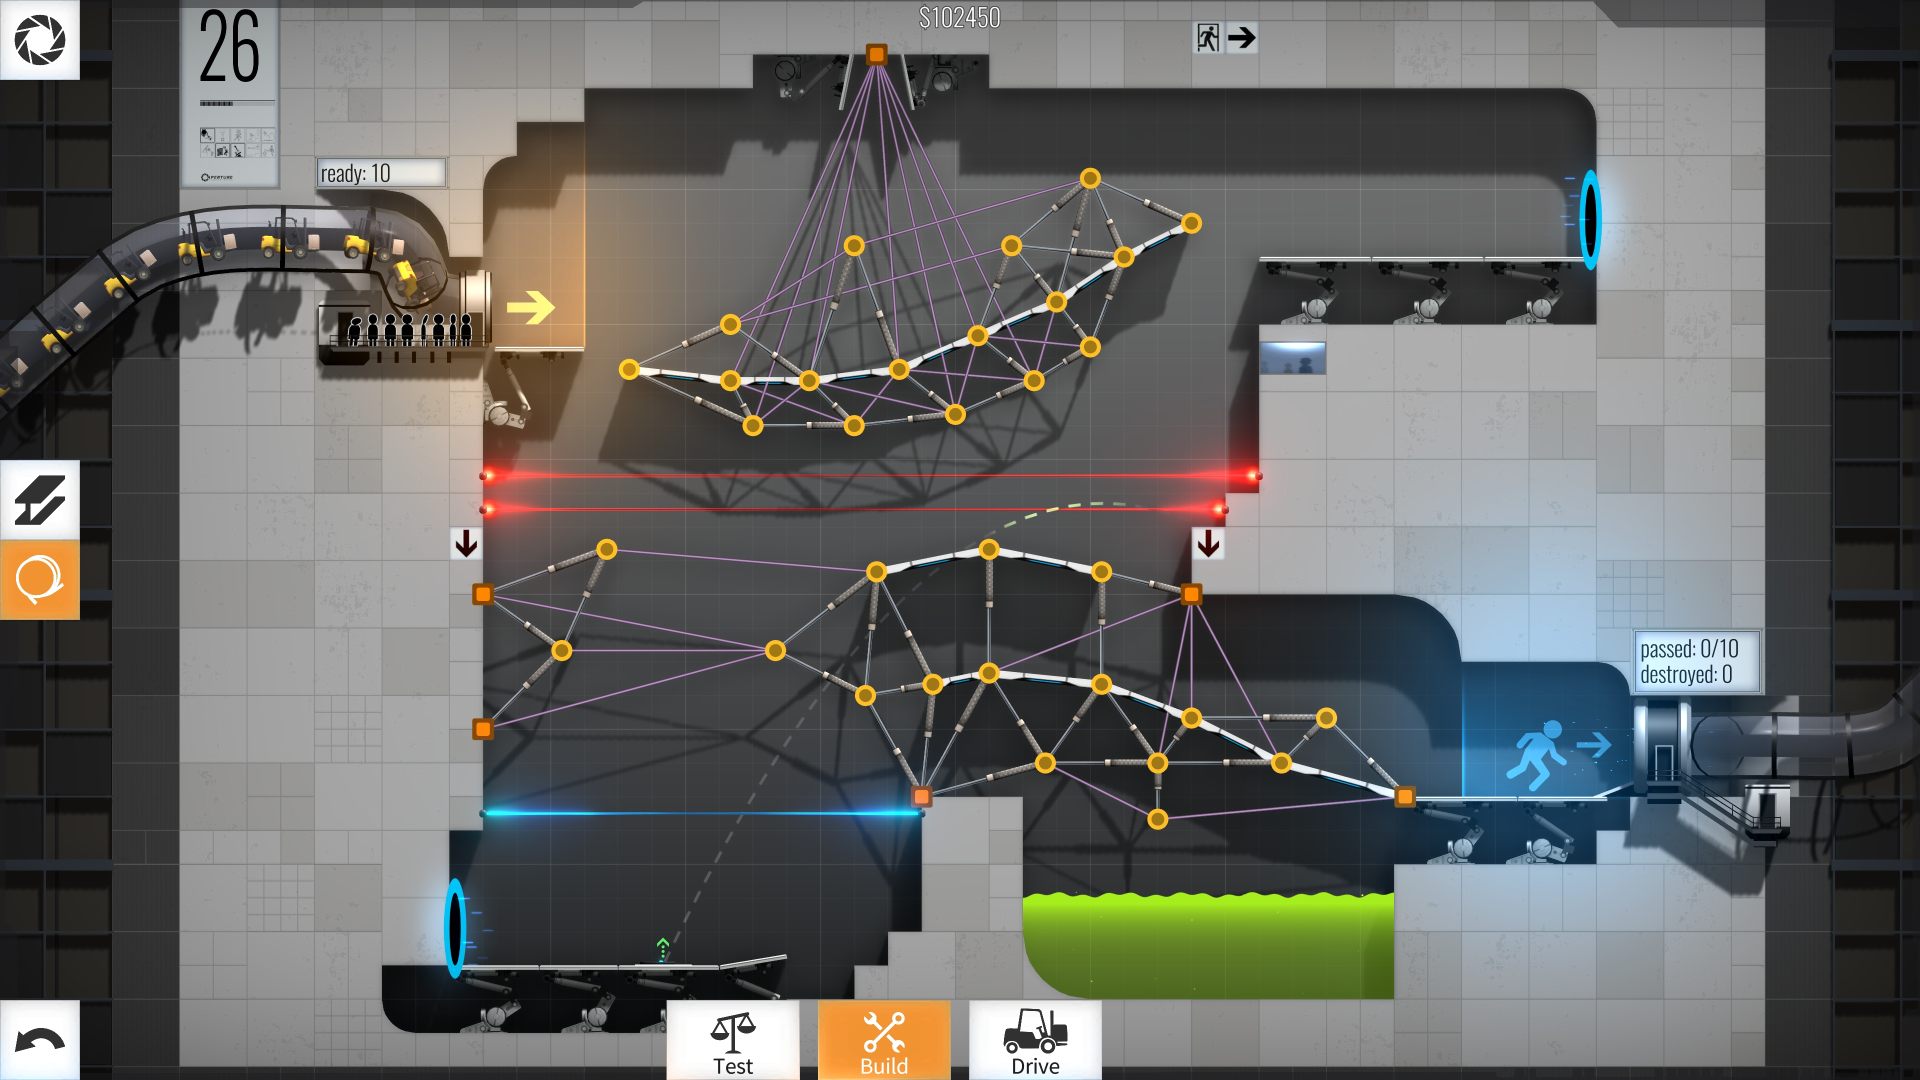 Bridge Constructor Portal, a game based all around it's physics engine programming.